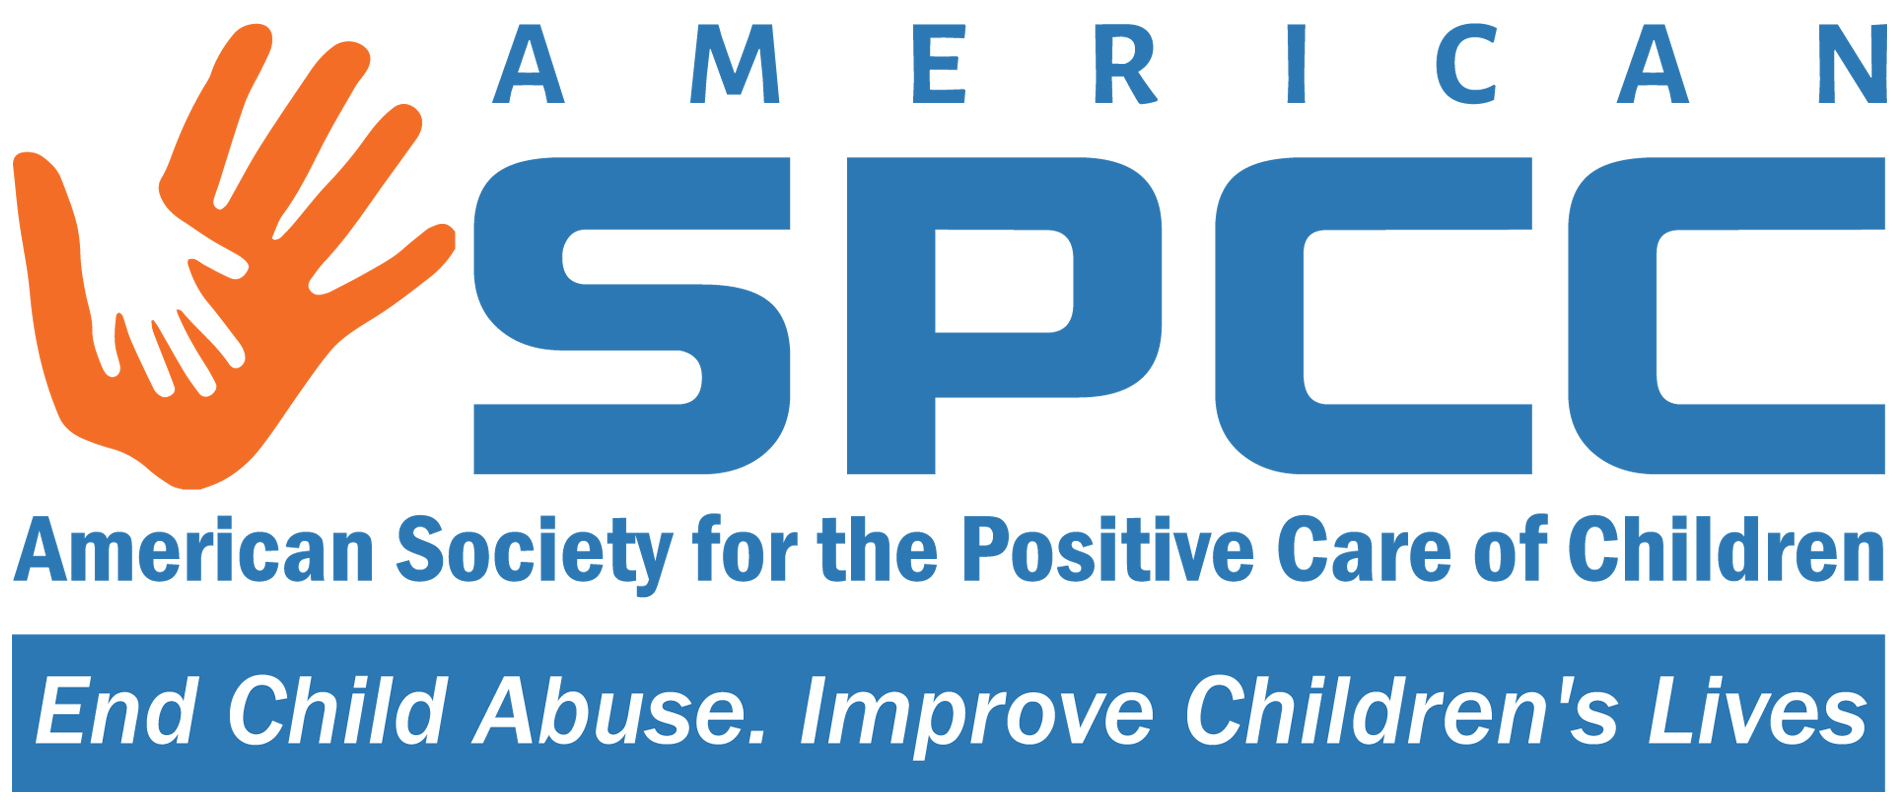 American SPCC Expands its Focus to Ending School Violence